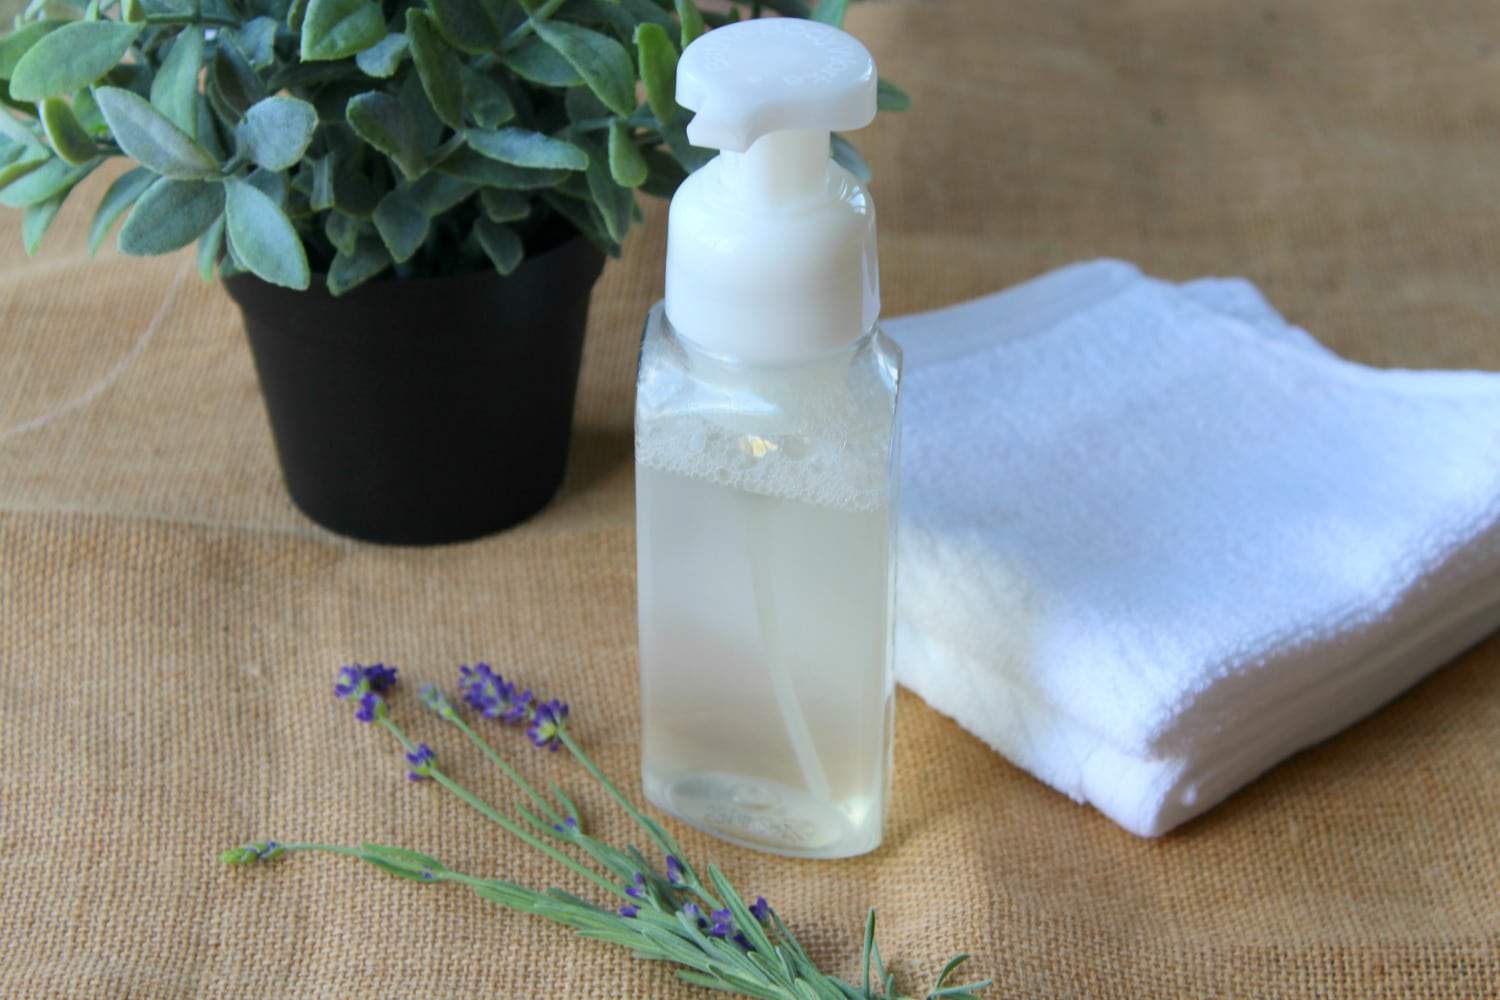 Homemade foaming hand soap next to a pot of plant, white towels and a stem of plant with purple flowers.